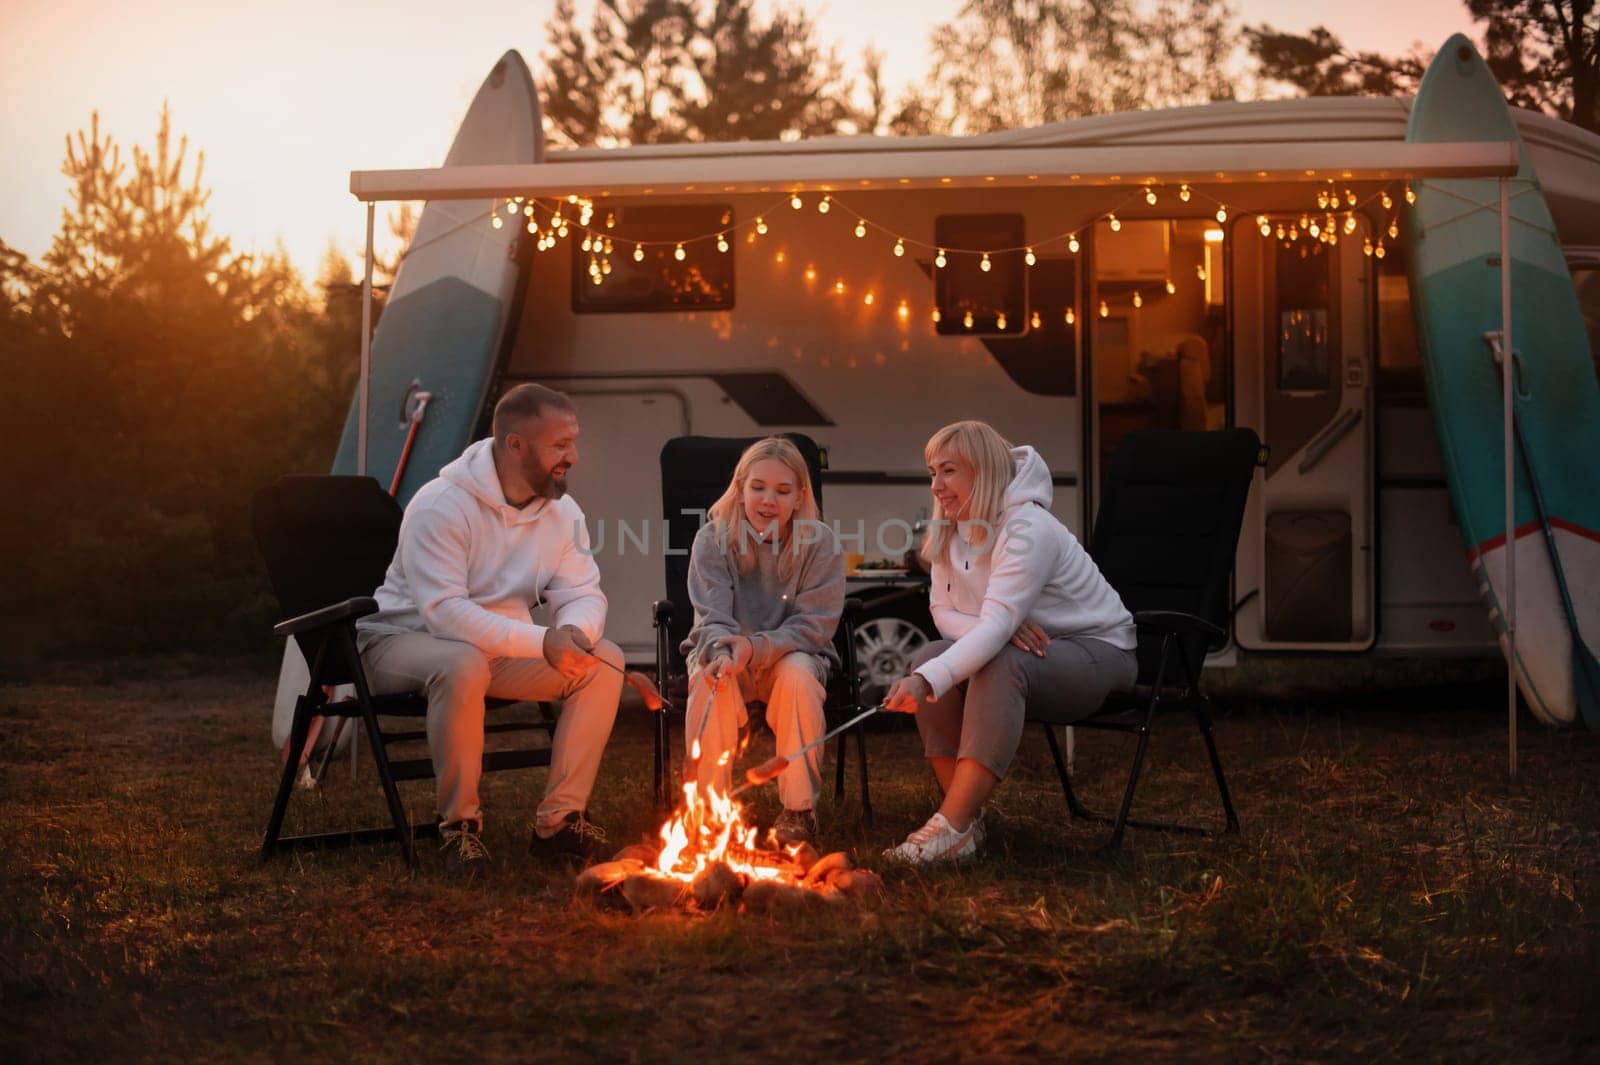 A family cooks sausages on a bonfire near their motorhome in the woods.